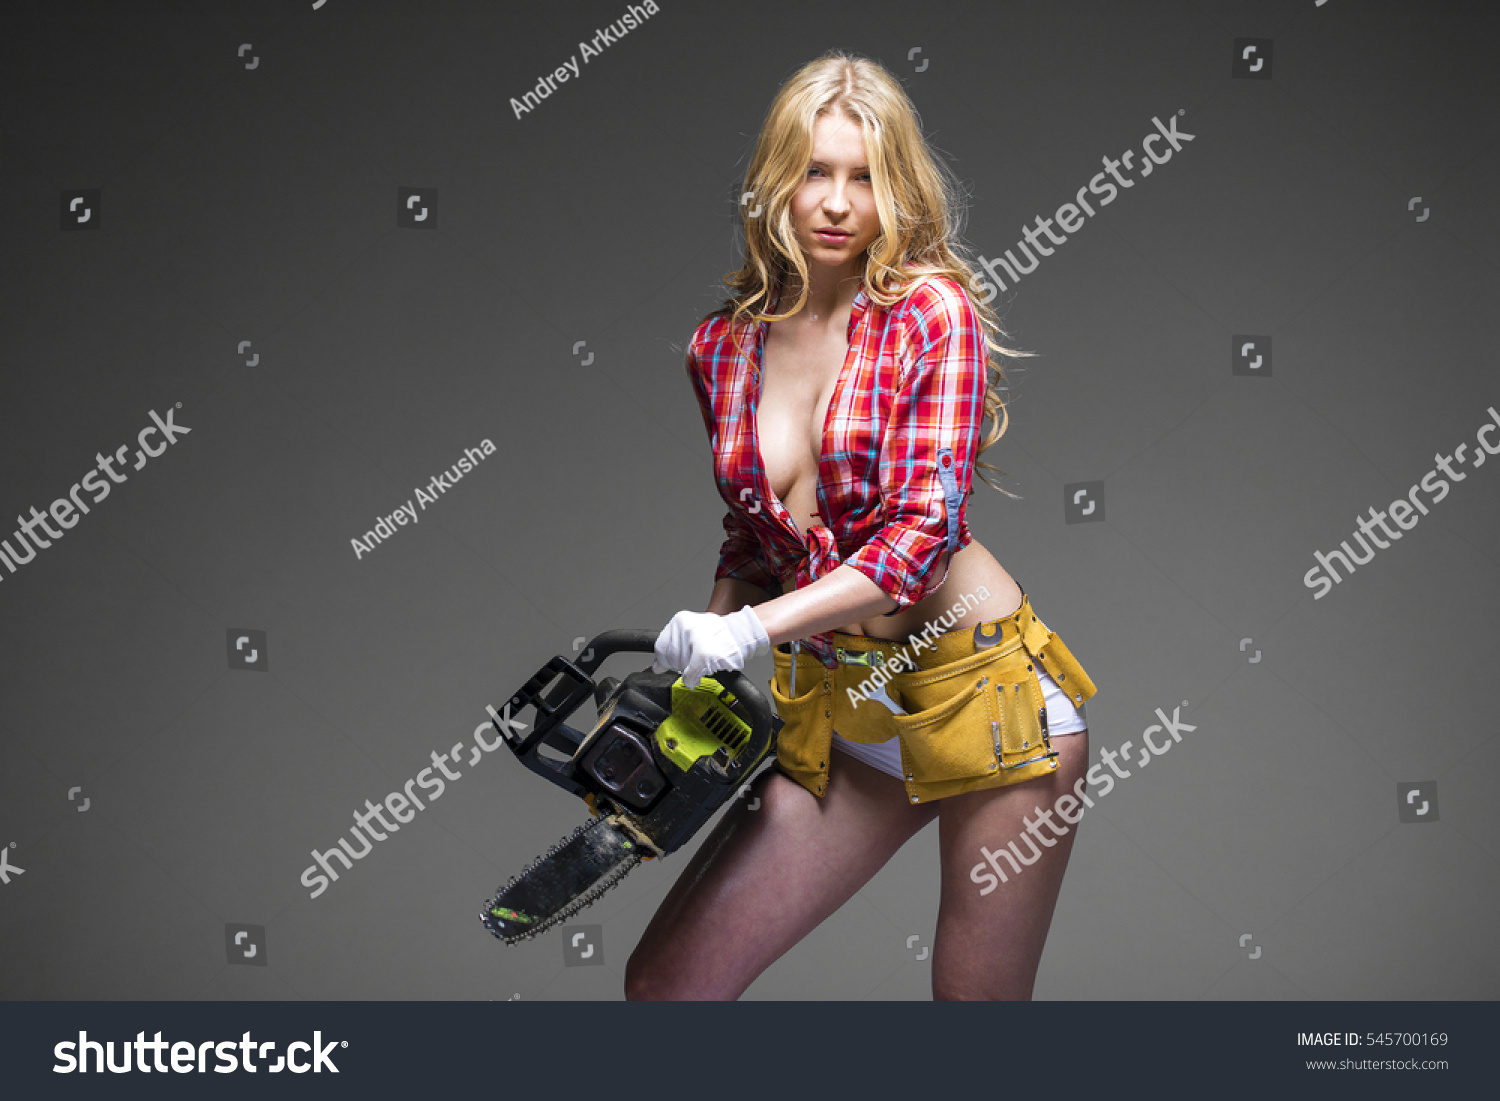 https://image.shutterstock.com/z/stock-photo-satisfaction-project-beautiful-hot-blond-woman-hold-a-chainsaw-over-gray-background-isolated-545700169.jpg